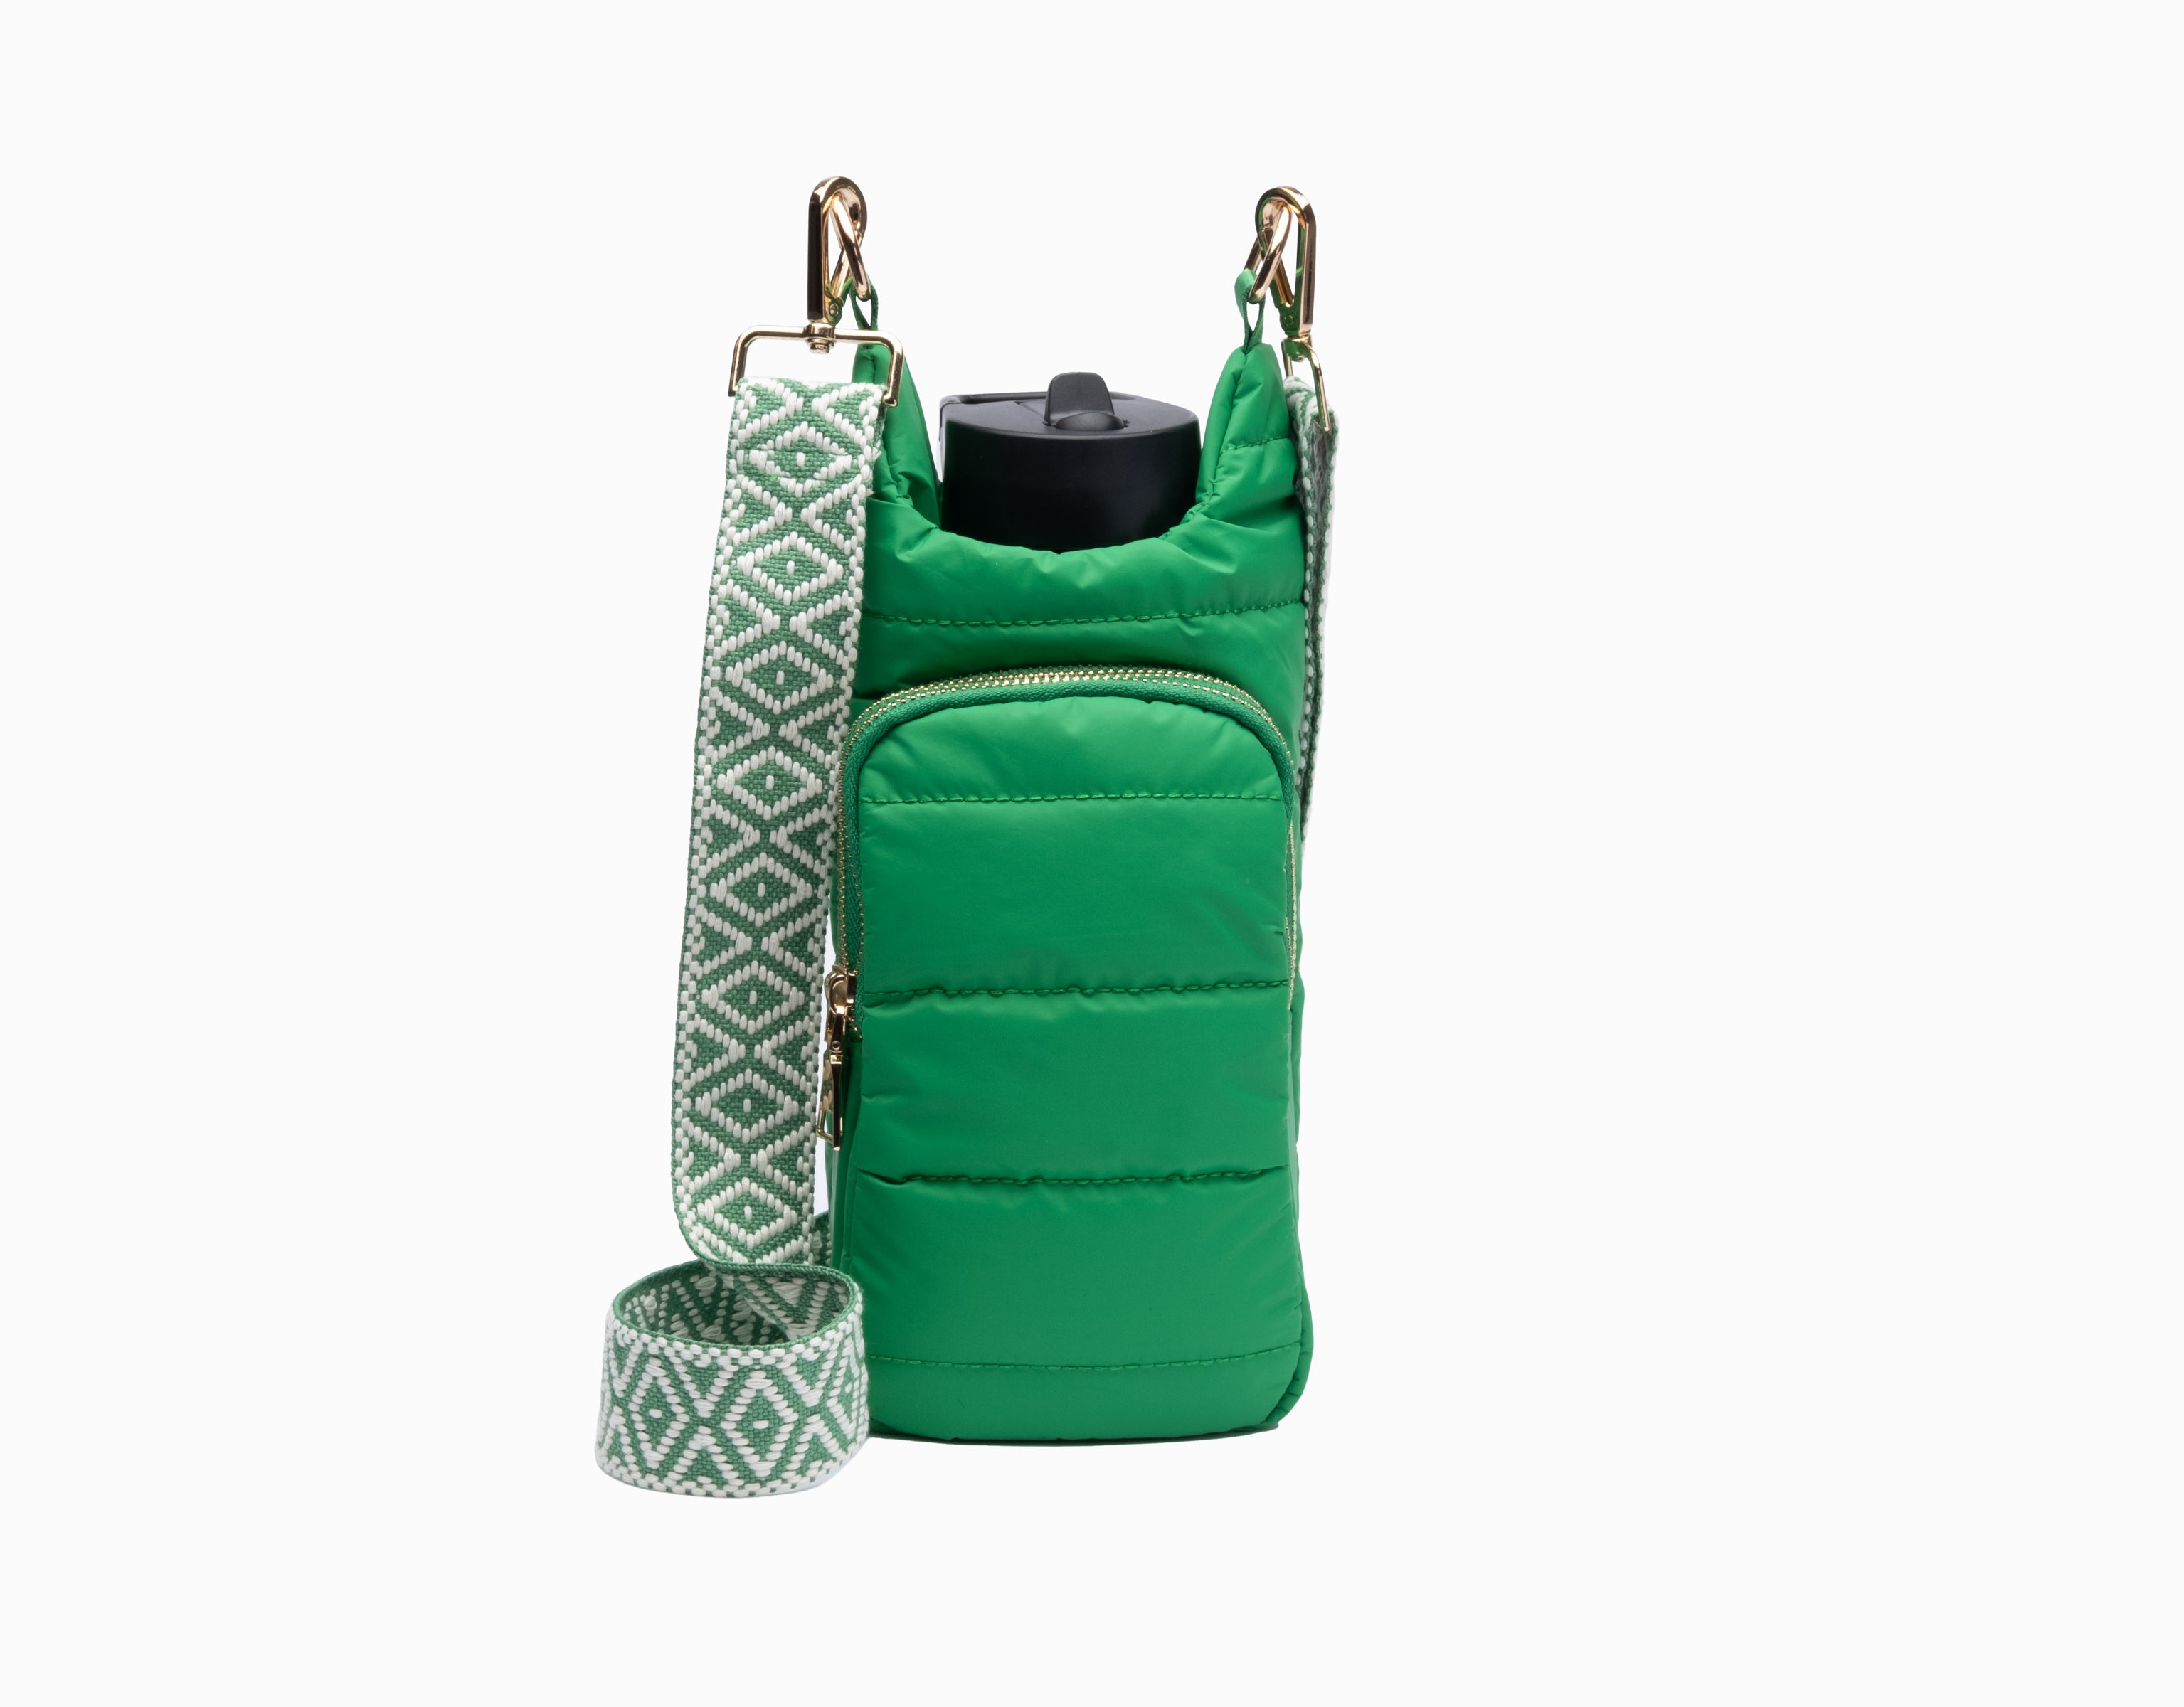 Wholesale Packs (4 or 10) - Kelly Green Matte HydroBag with Green/Cream Strap